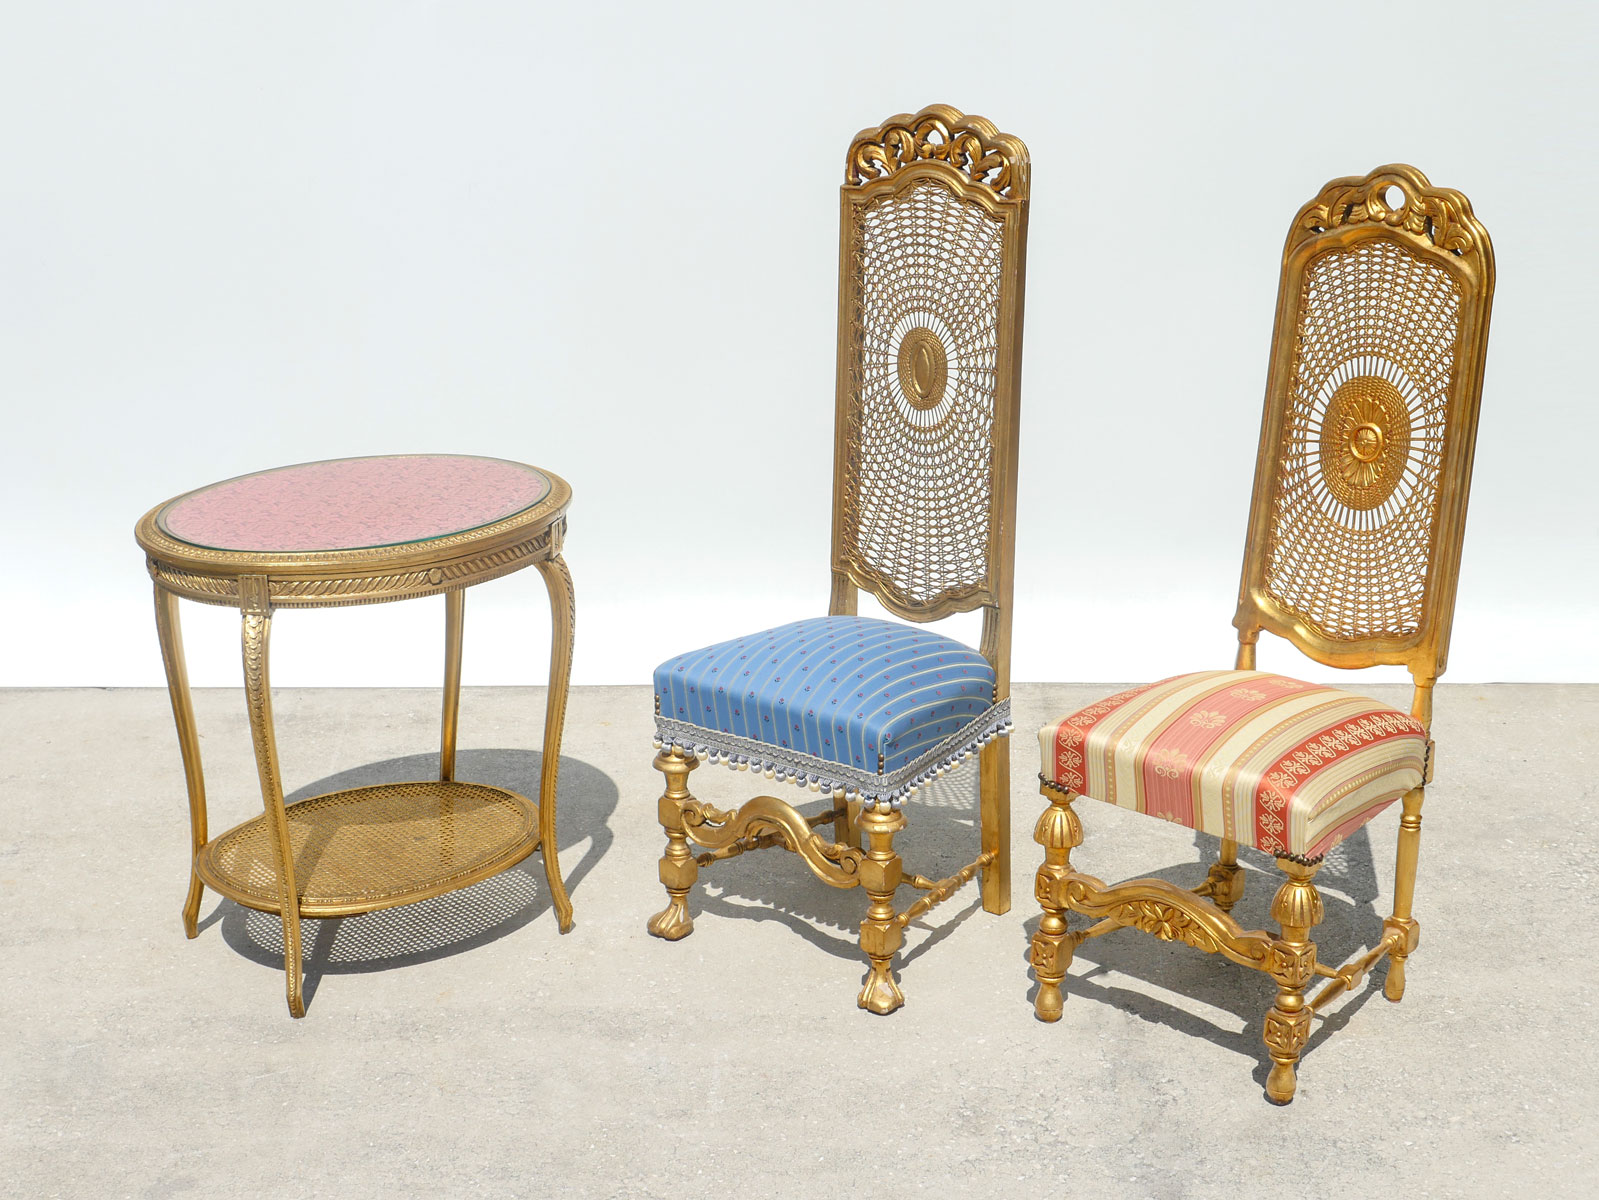 3 PIECE WOVEN CANE TABLE AND CHAIRS  36f5d0